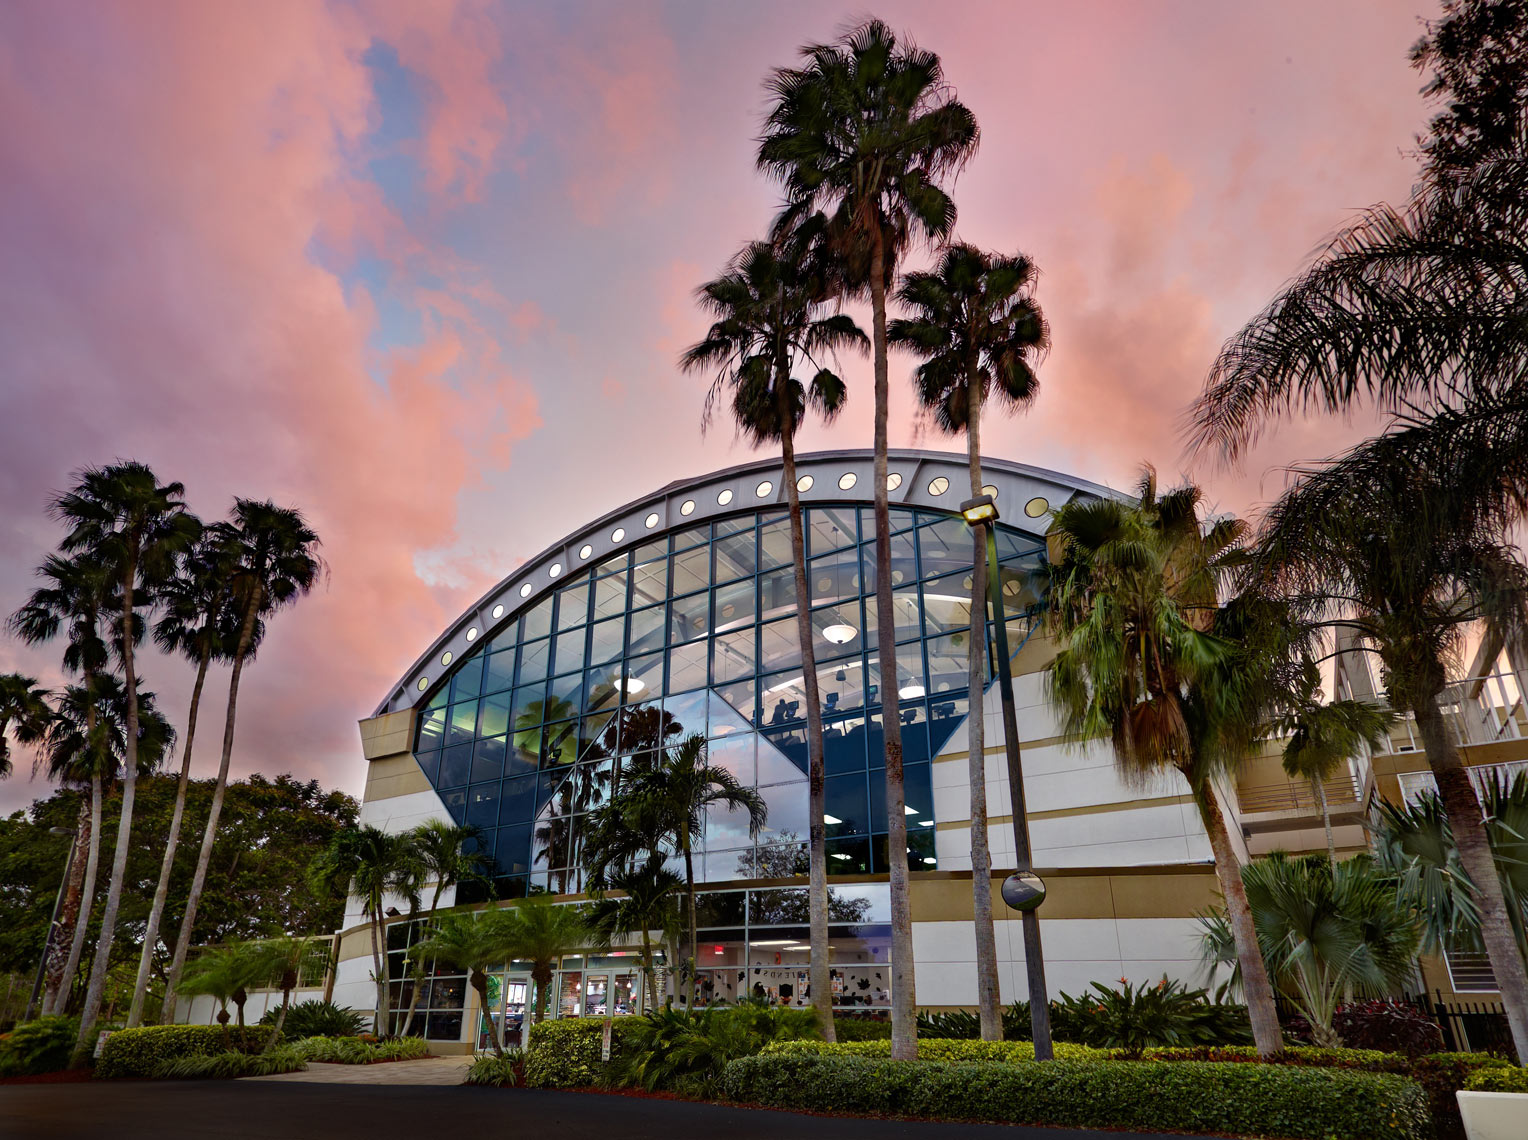 Lifetime Fitness exterior/large glass front/palm trees/architectural photo